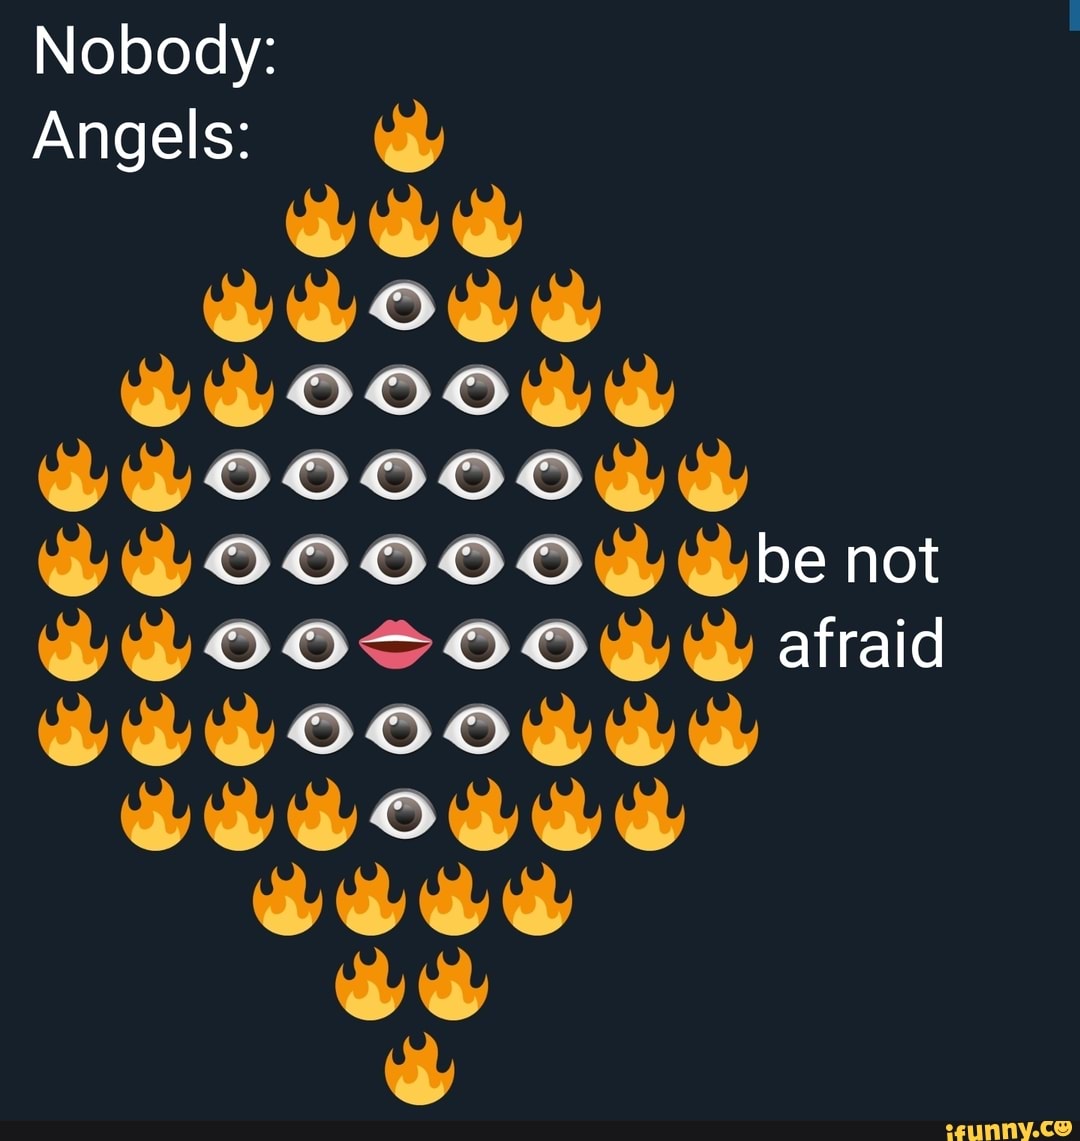 ID: On a dark background, white writing reads Nobody: followed by nothing; Angels: and a mouth emoji surrounded by many eye emojis surrounded by many flame emojis. To the right are the words: be not afraid